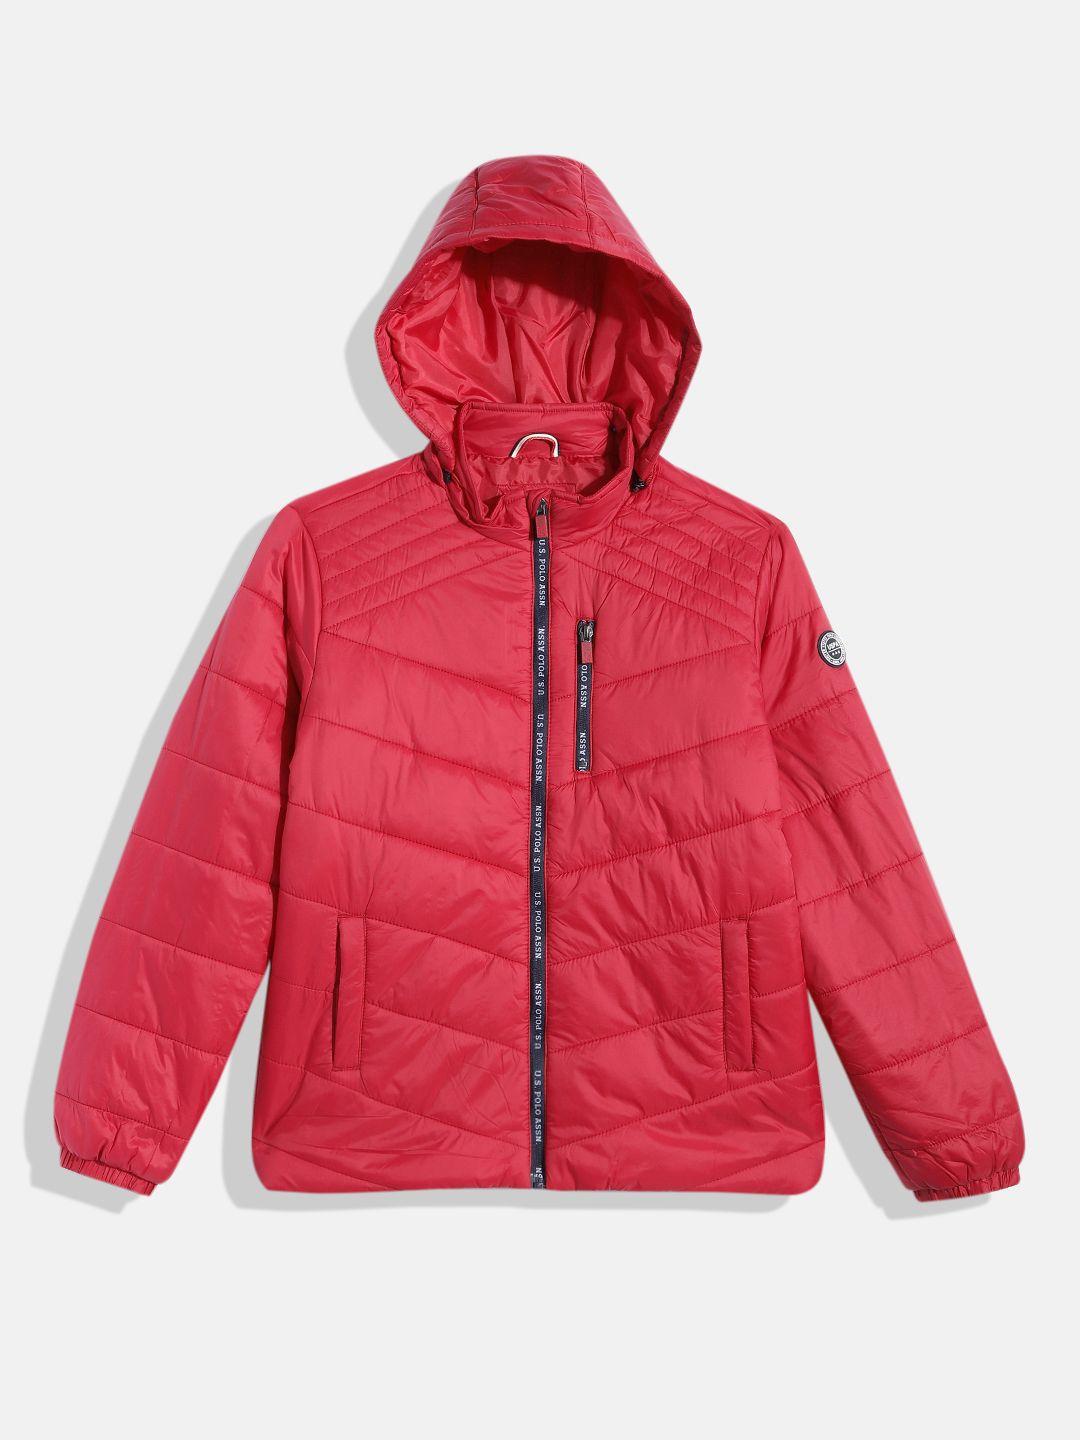 u.s. polo assn. kids boys red solid puffer jacket